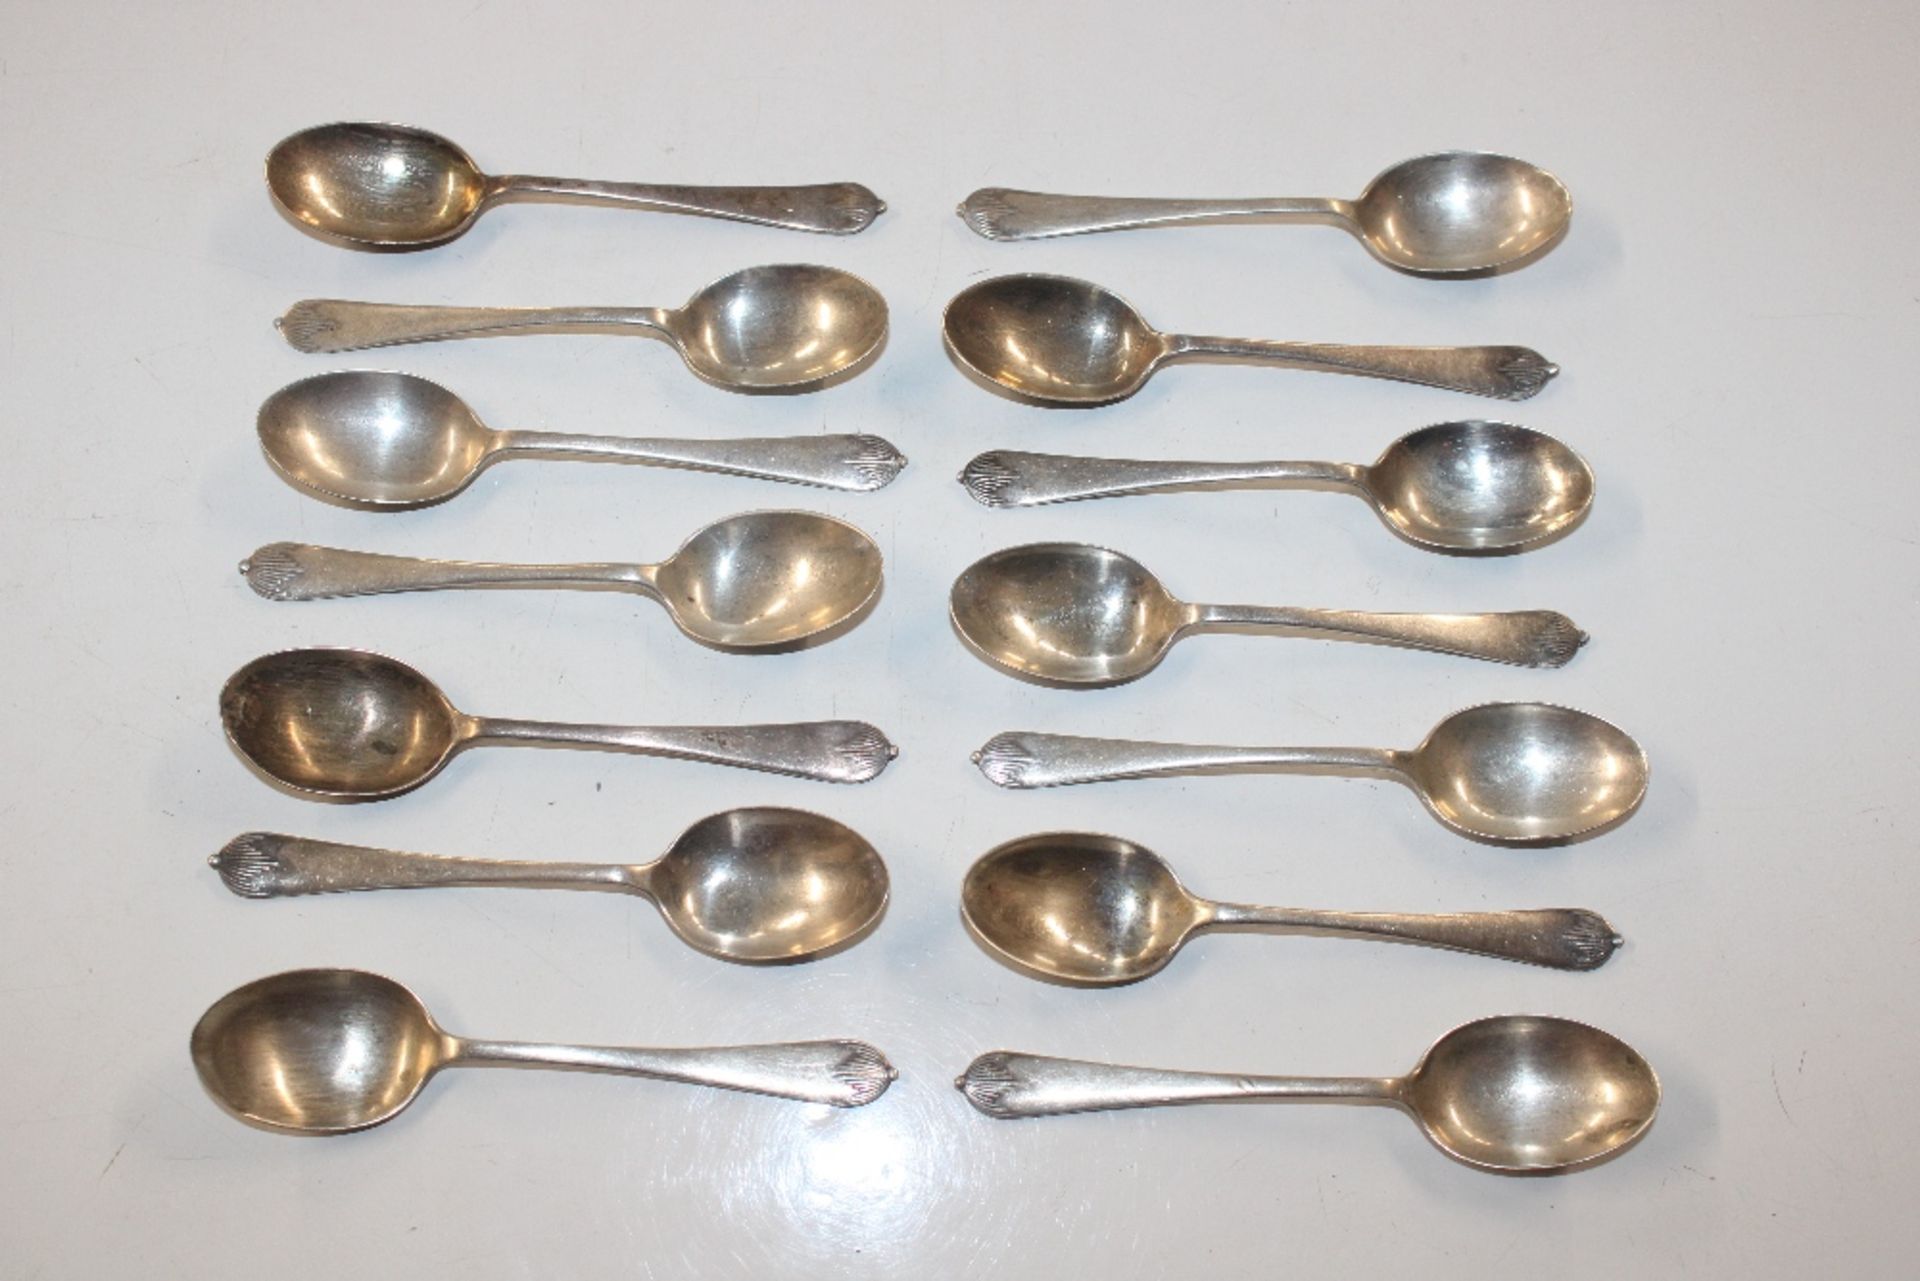 Fourteen silver teaspoons with engraving relating